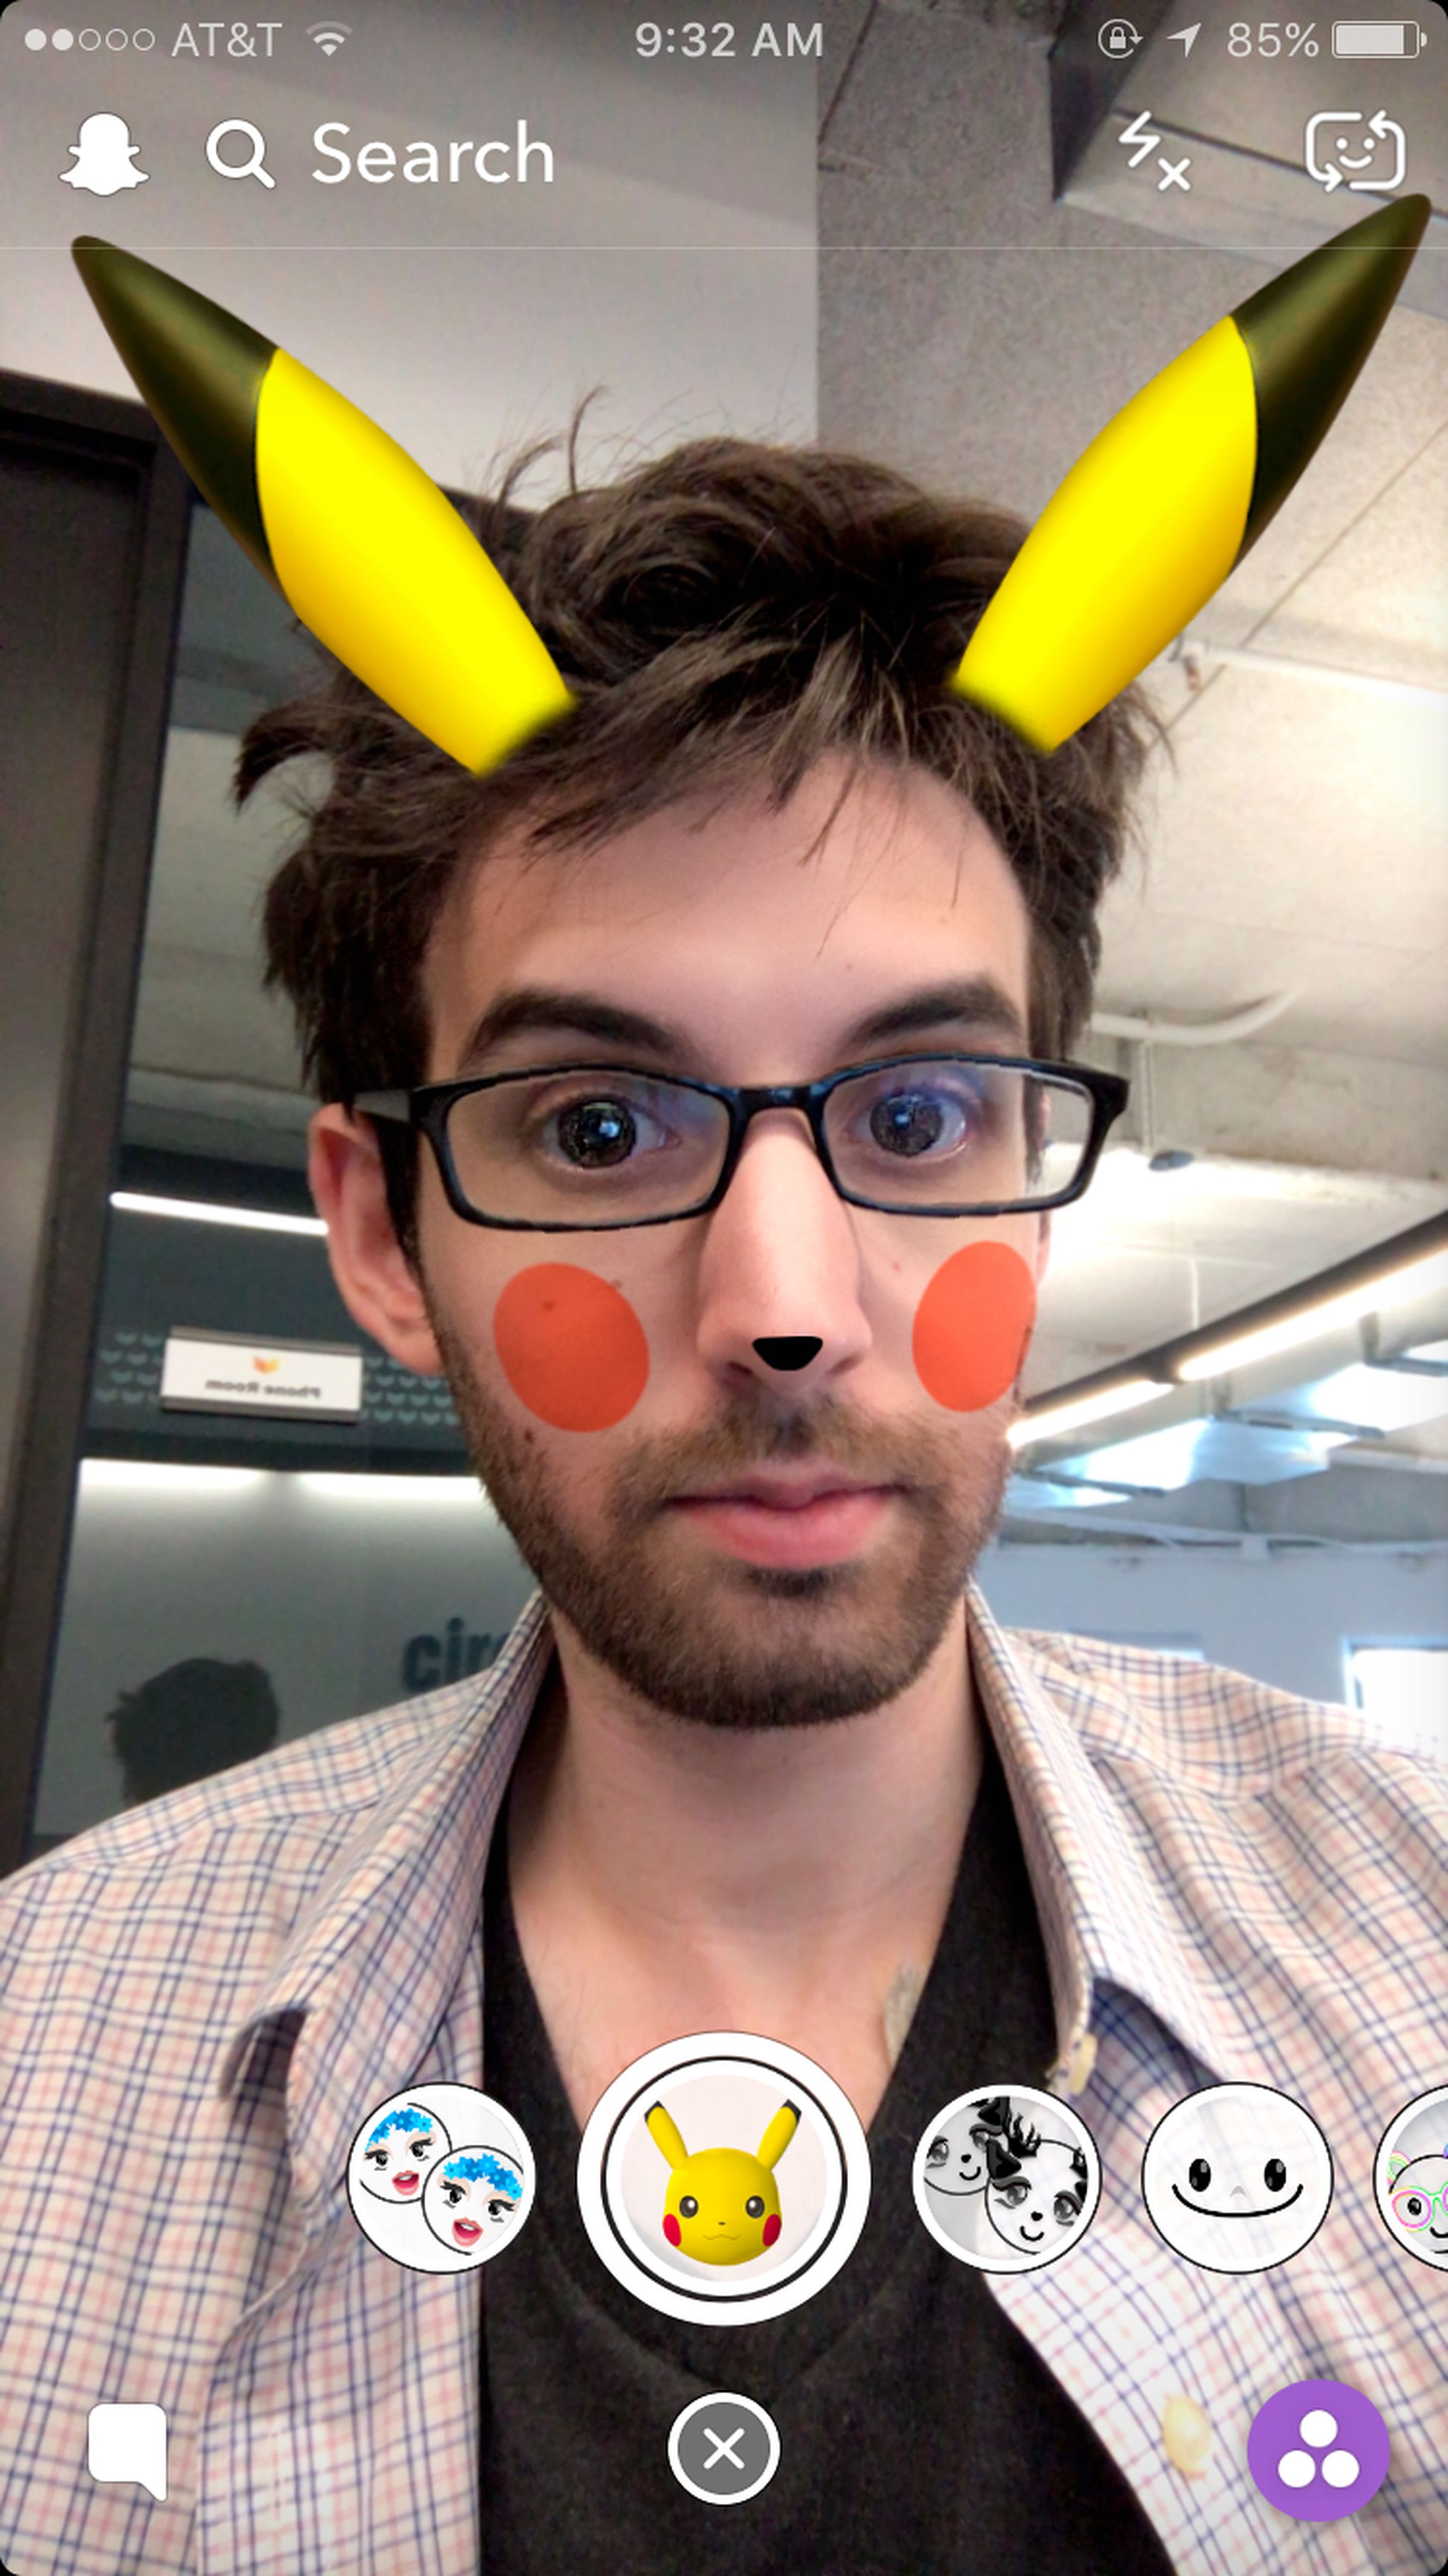 My co-worker Chaim generously offers up his terrifying Pika face.